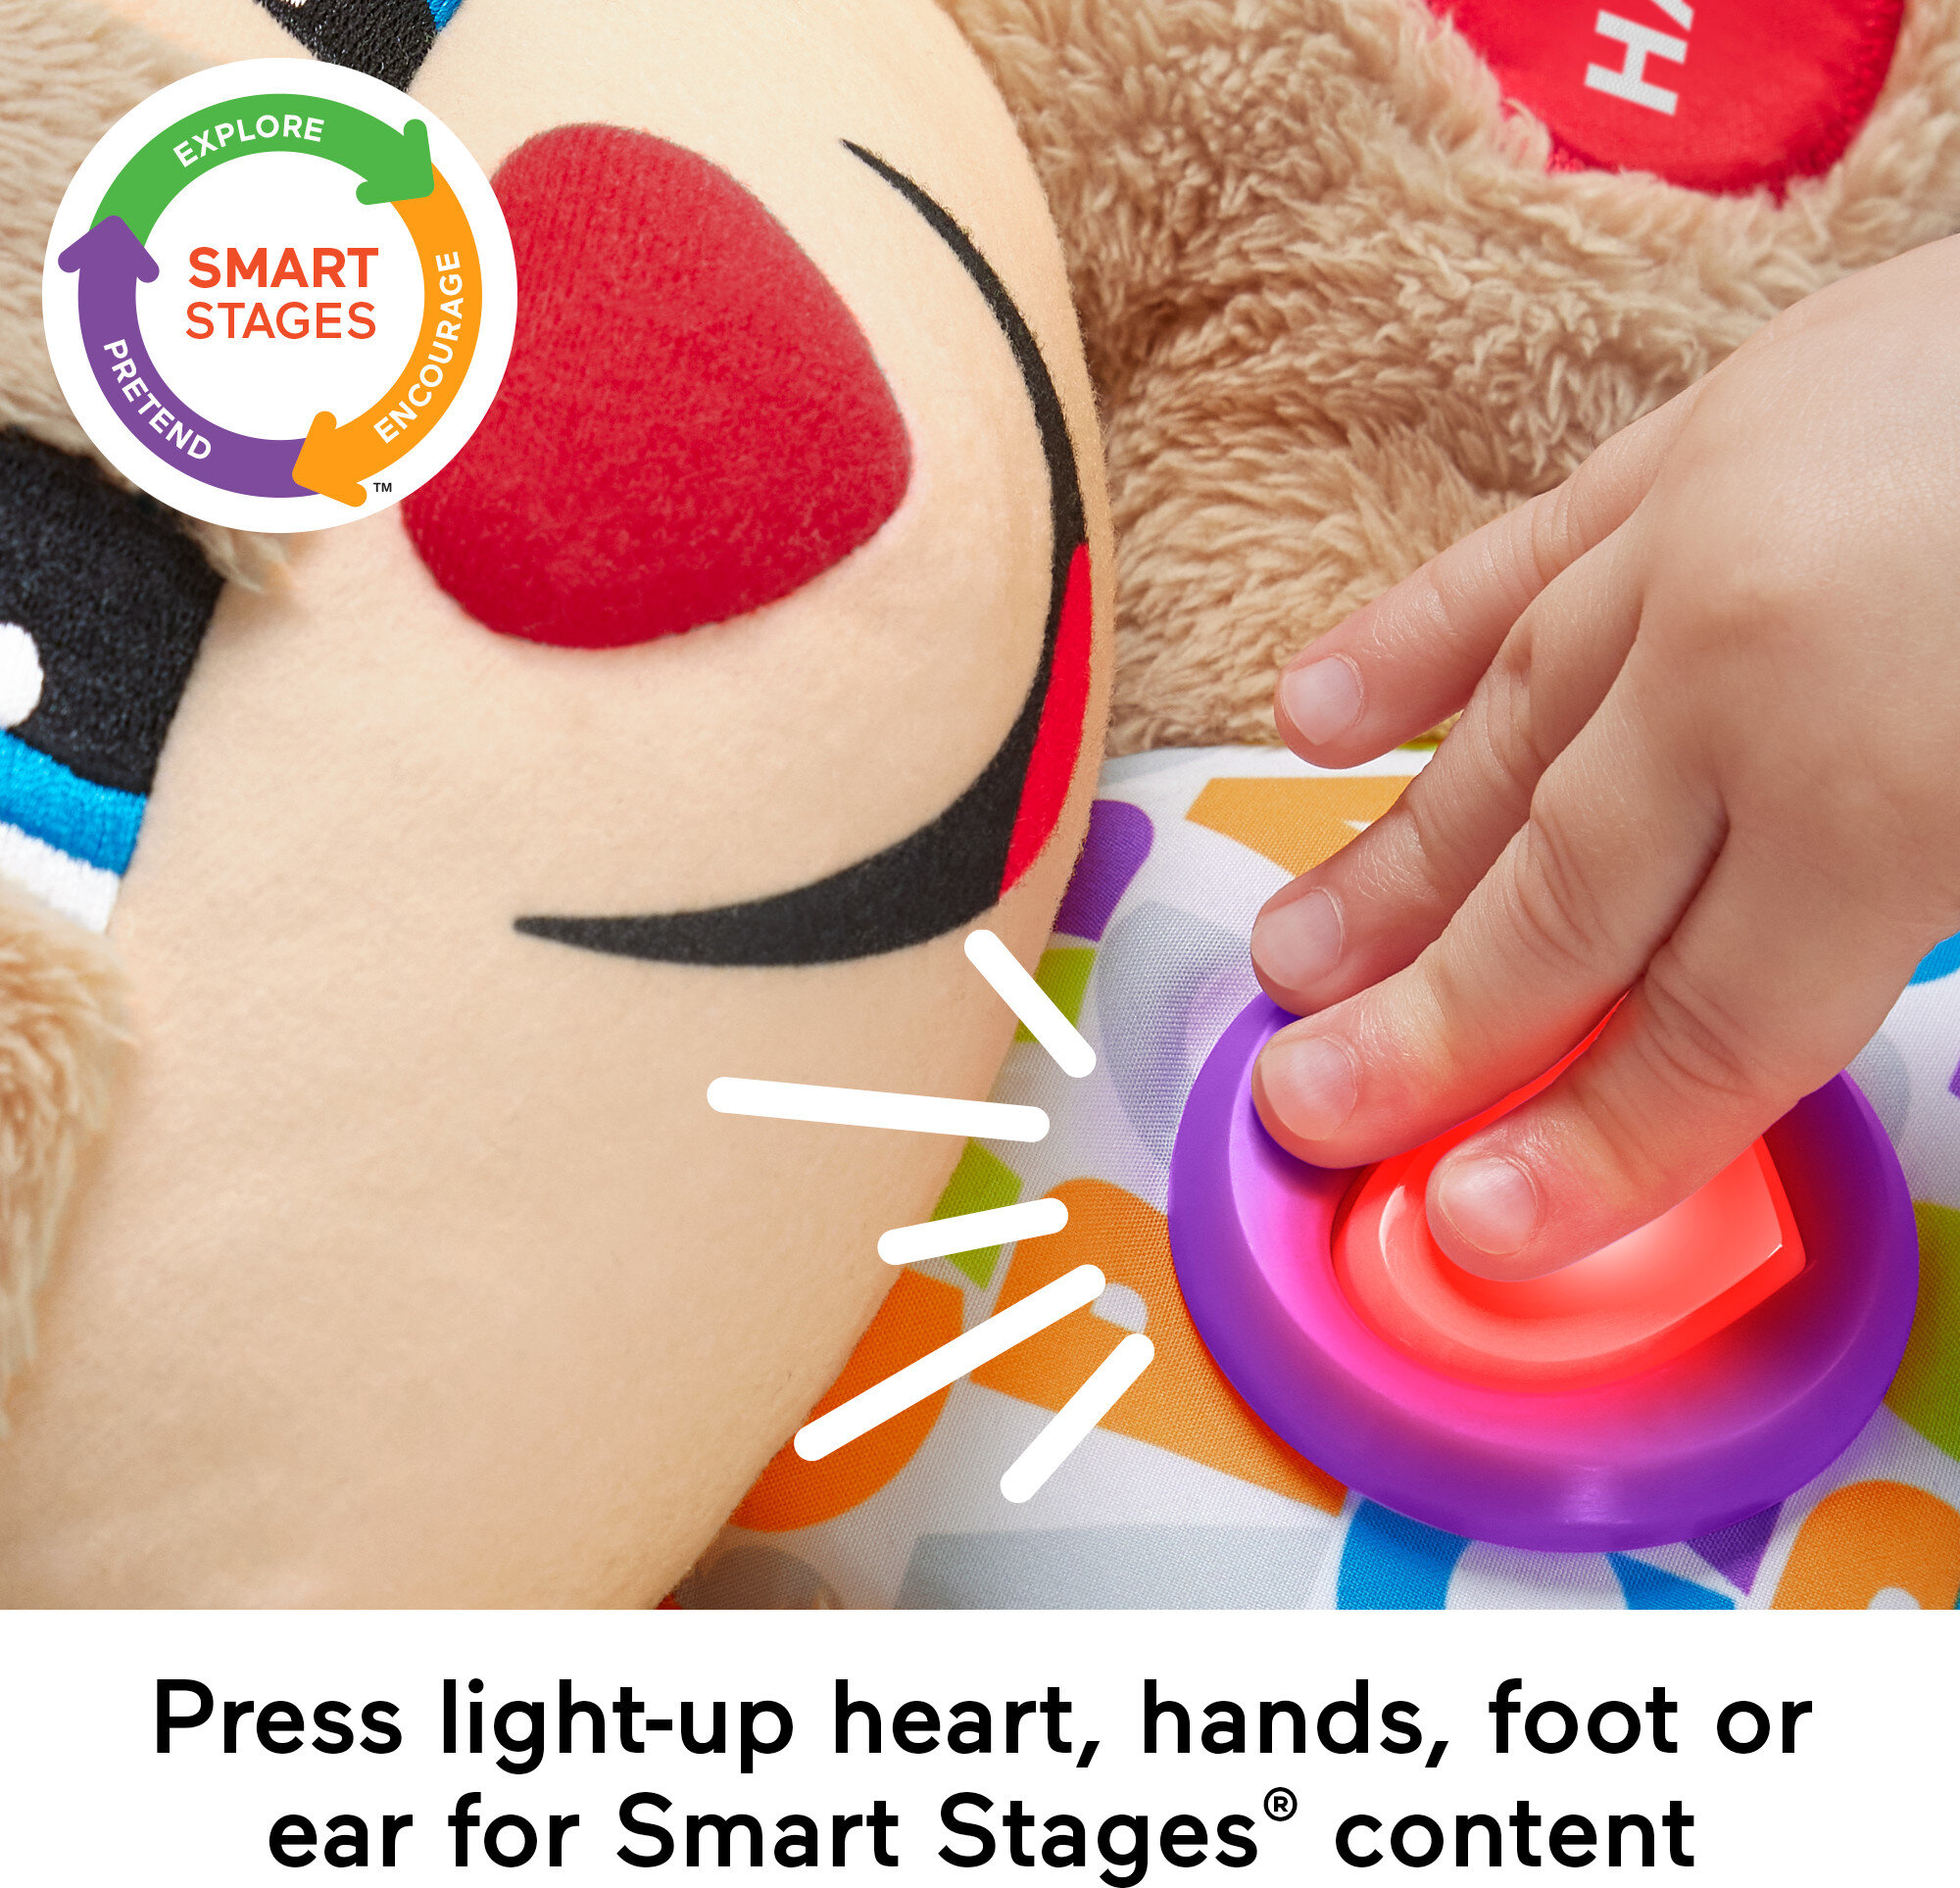 Fisher-Price Laugh & Learn Smart Stages Puppy Plush Learning Toy for Baby, Infants and Toddlers - image 4 of 8